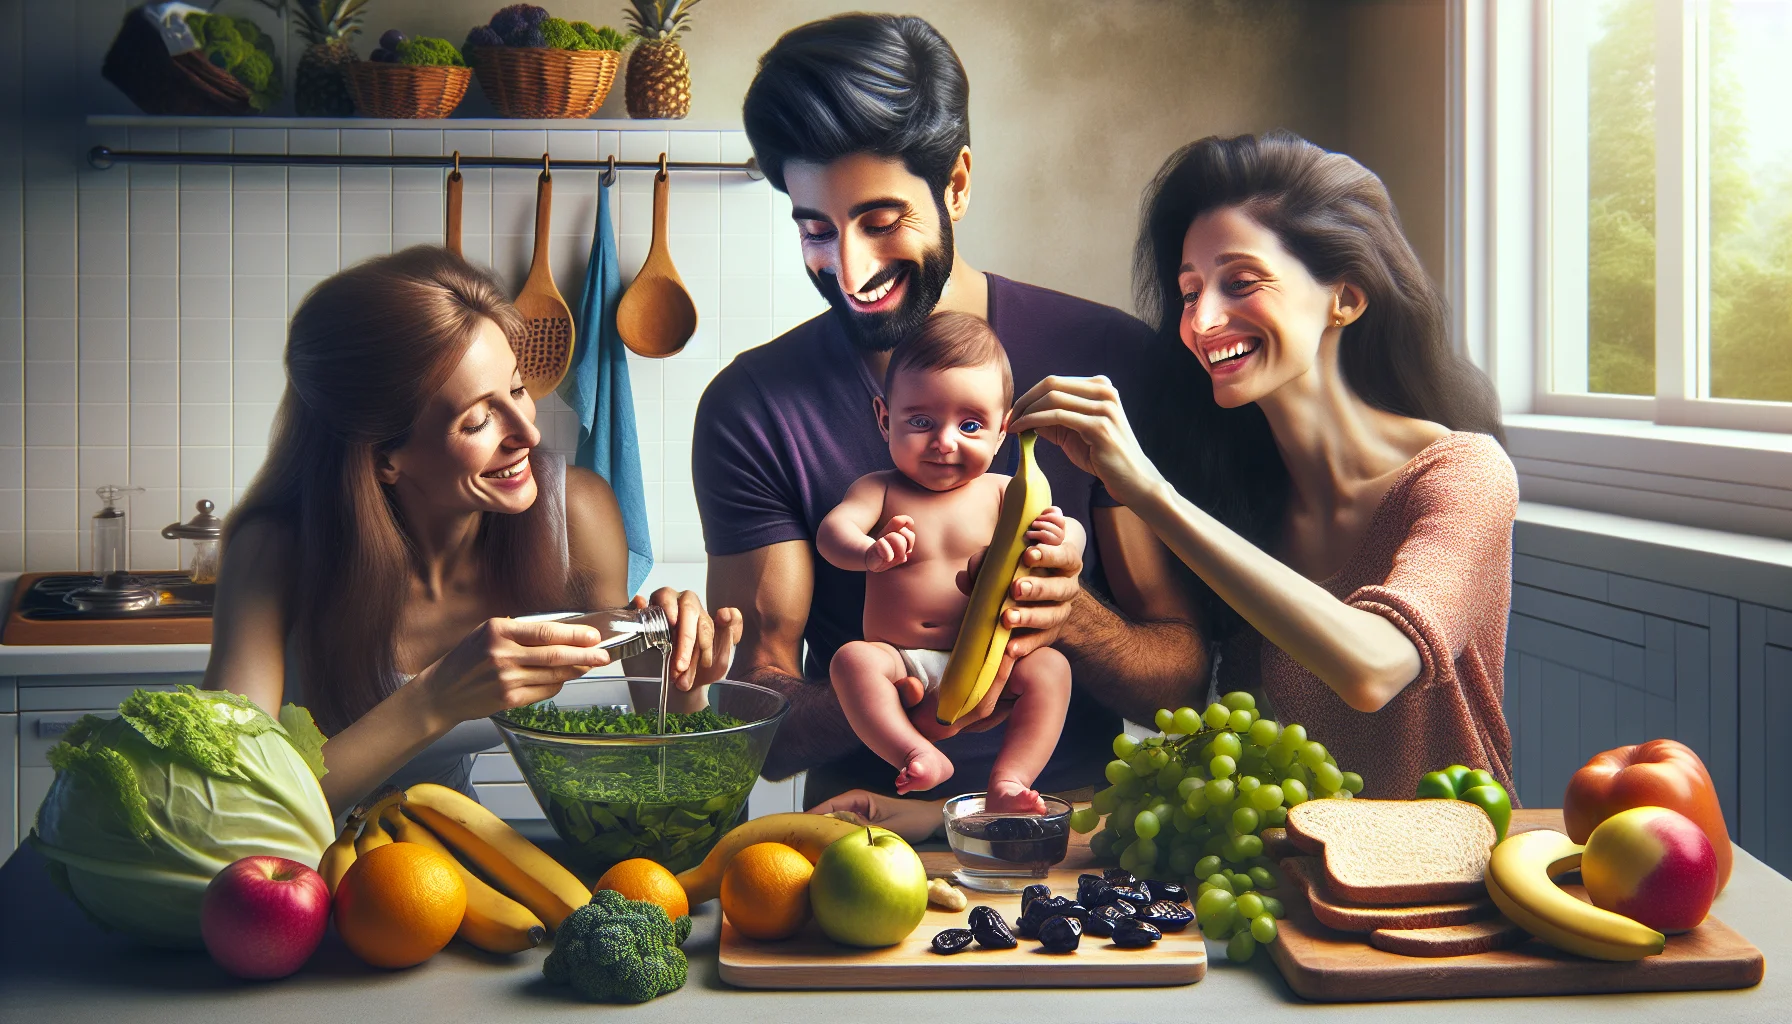 Create a realistic yet amusing depiction of various natural remedies for infant constipation. Picture a scene where a Middle-Eastern male and a Hispanic female are playfully engaging their Caucasian baby with these remedies. They could utilize ripe bananas, soaked prunes, and warm water for the demonstration. They appear to be using a simple kitchen setup with green, leafy vegetables, colorful fruits, and whole wheat bread lying on the counter, all suggesting a healthy diet for a lesser cost. The tone should be playful and inviting, encouraging viewers to adopt healthier and cost-effective eating habits.